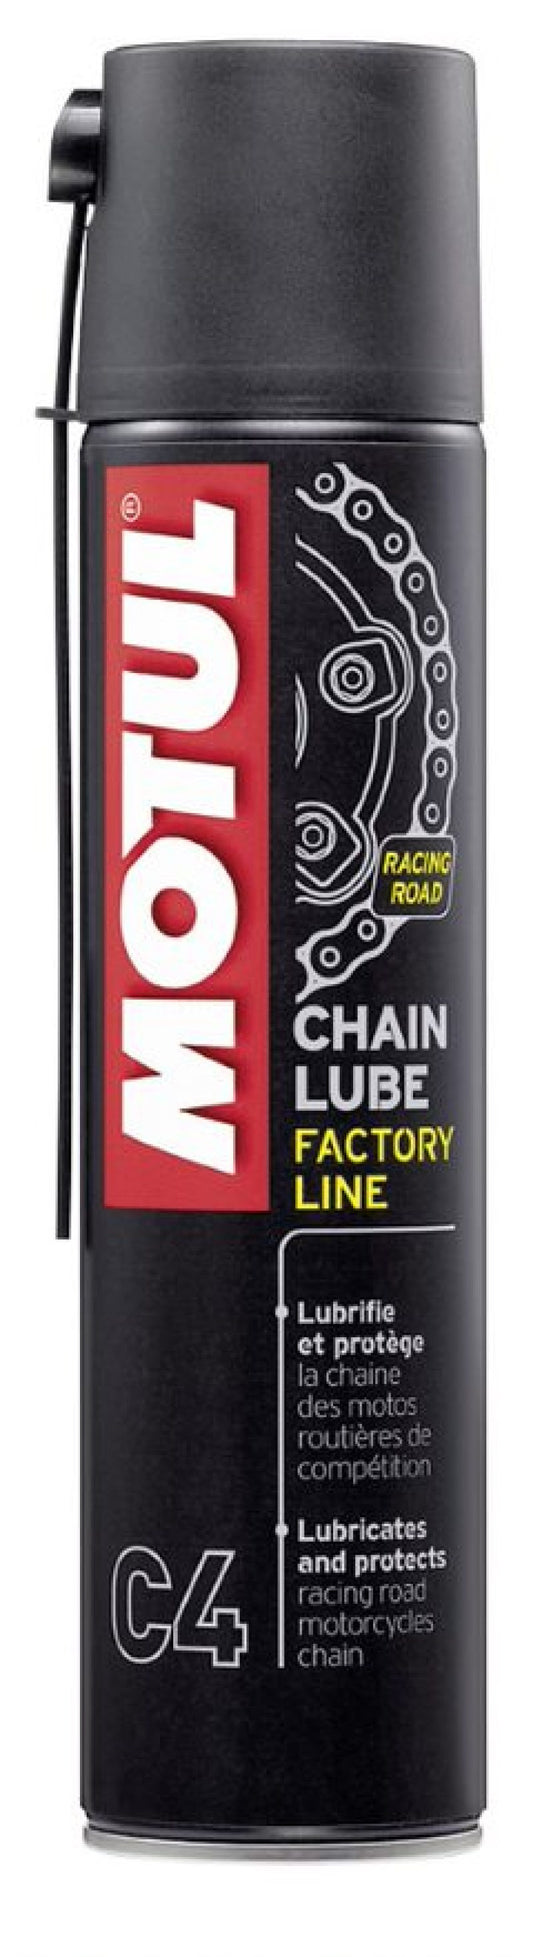 Motul .400L Cleaners C4 CHAIN LUBE FACTORY LINE (case of 12)